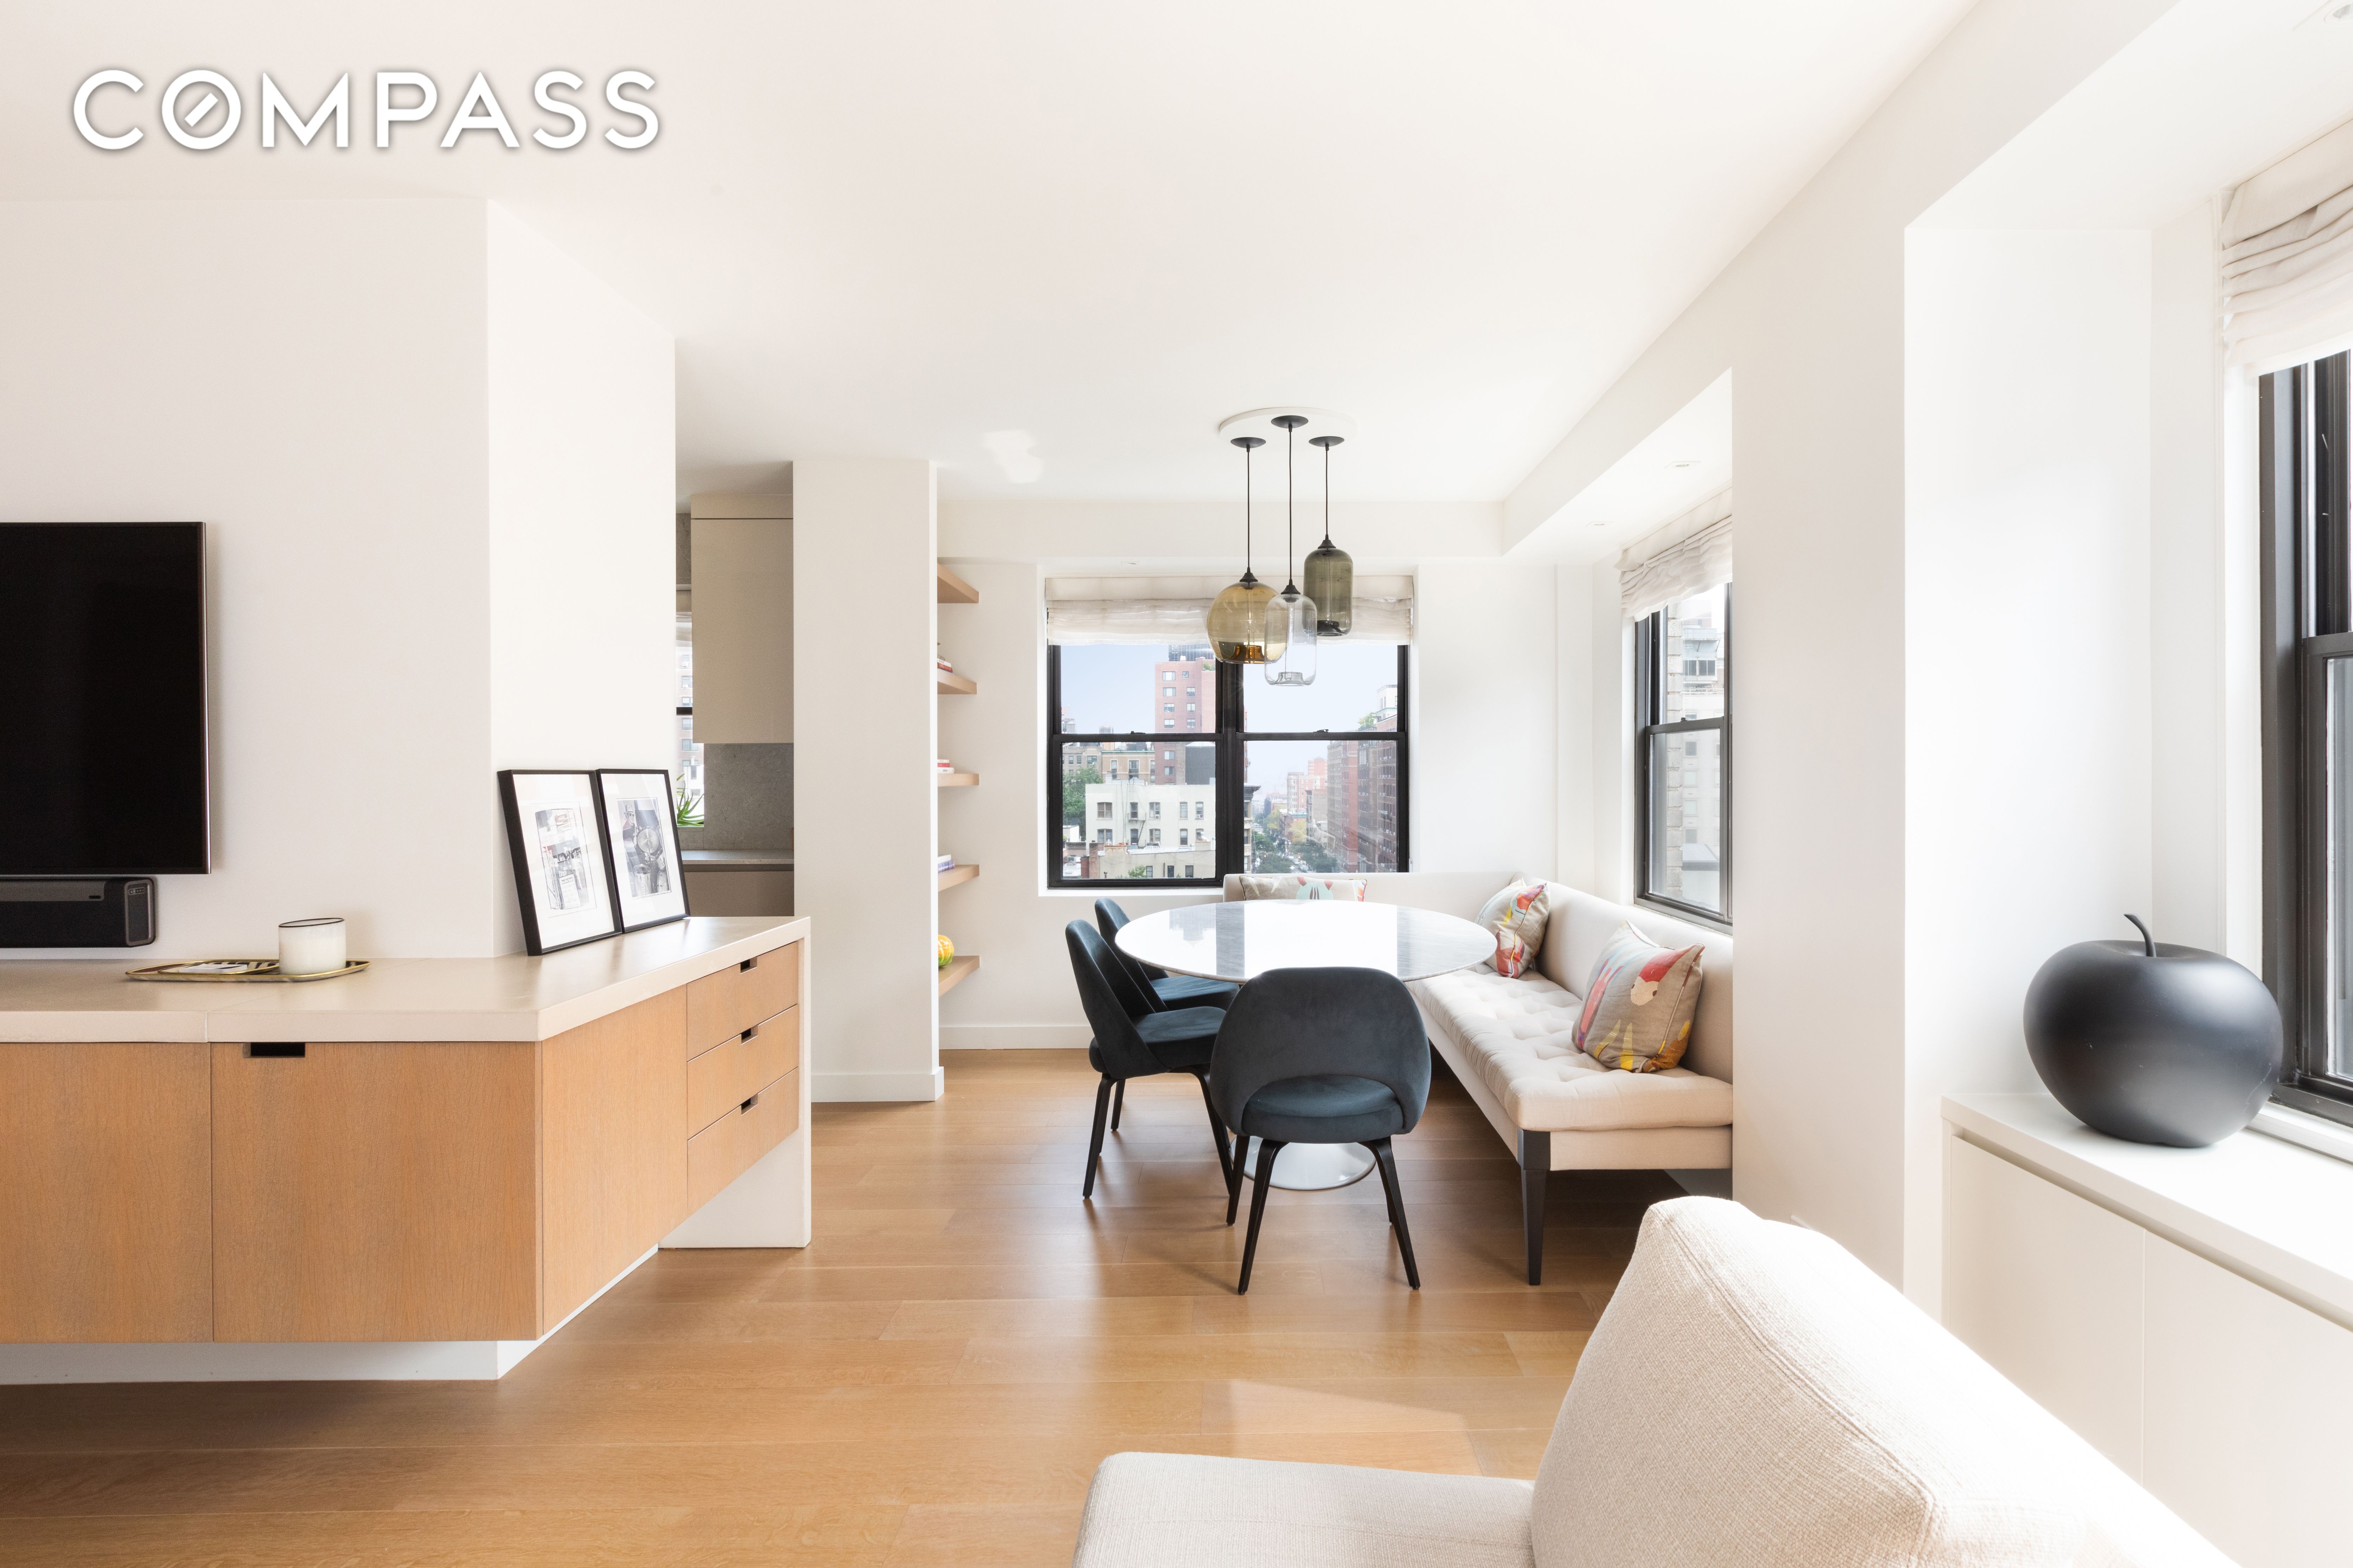 120 East 90th Street 10E, Upper East Side, Upper East Side, NYC - 2 Bedrooms  
2 Bathrooms  
5 Rooms - 